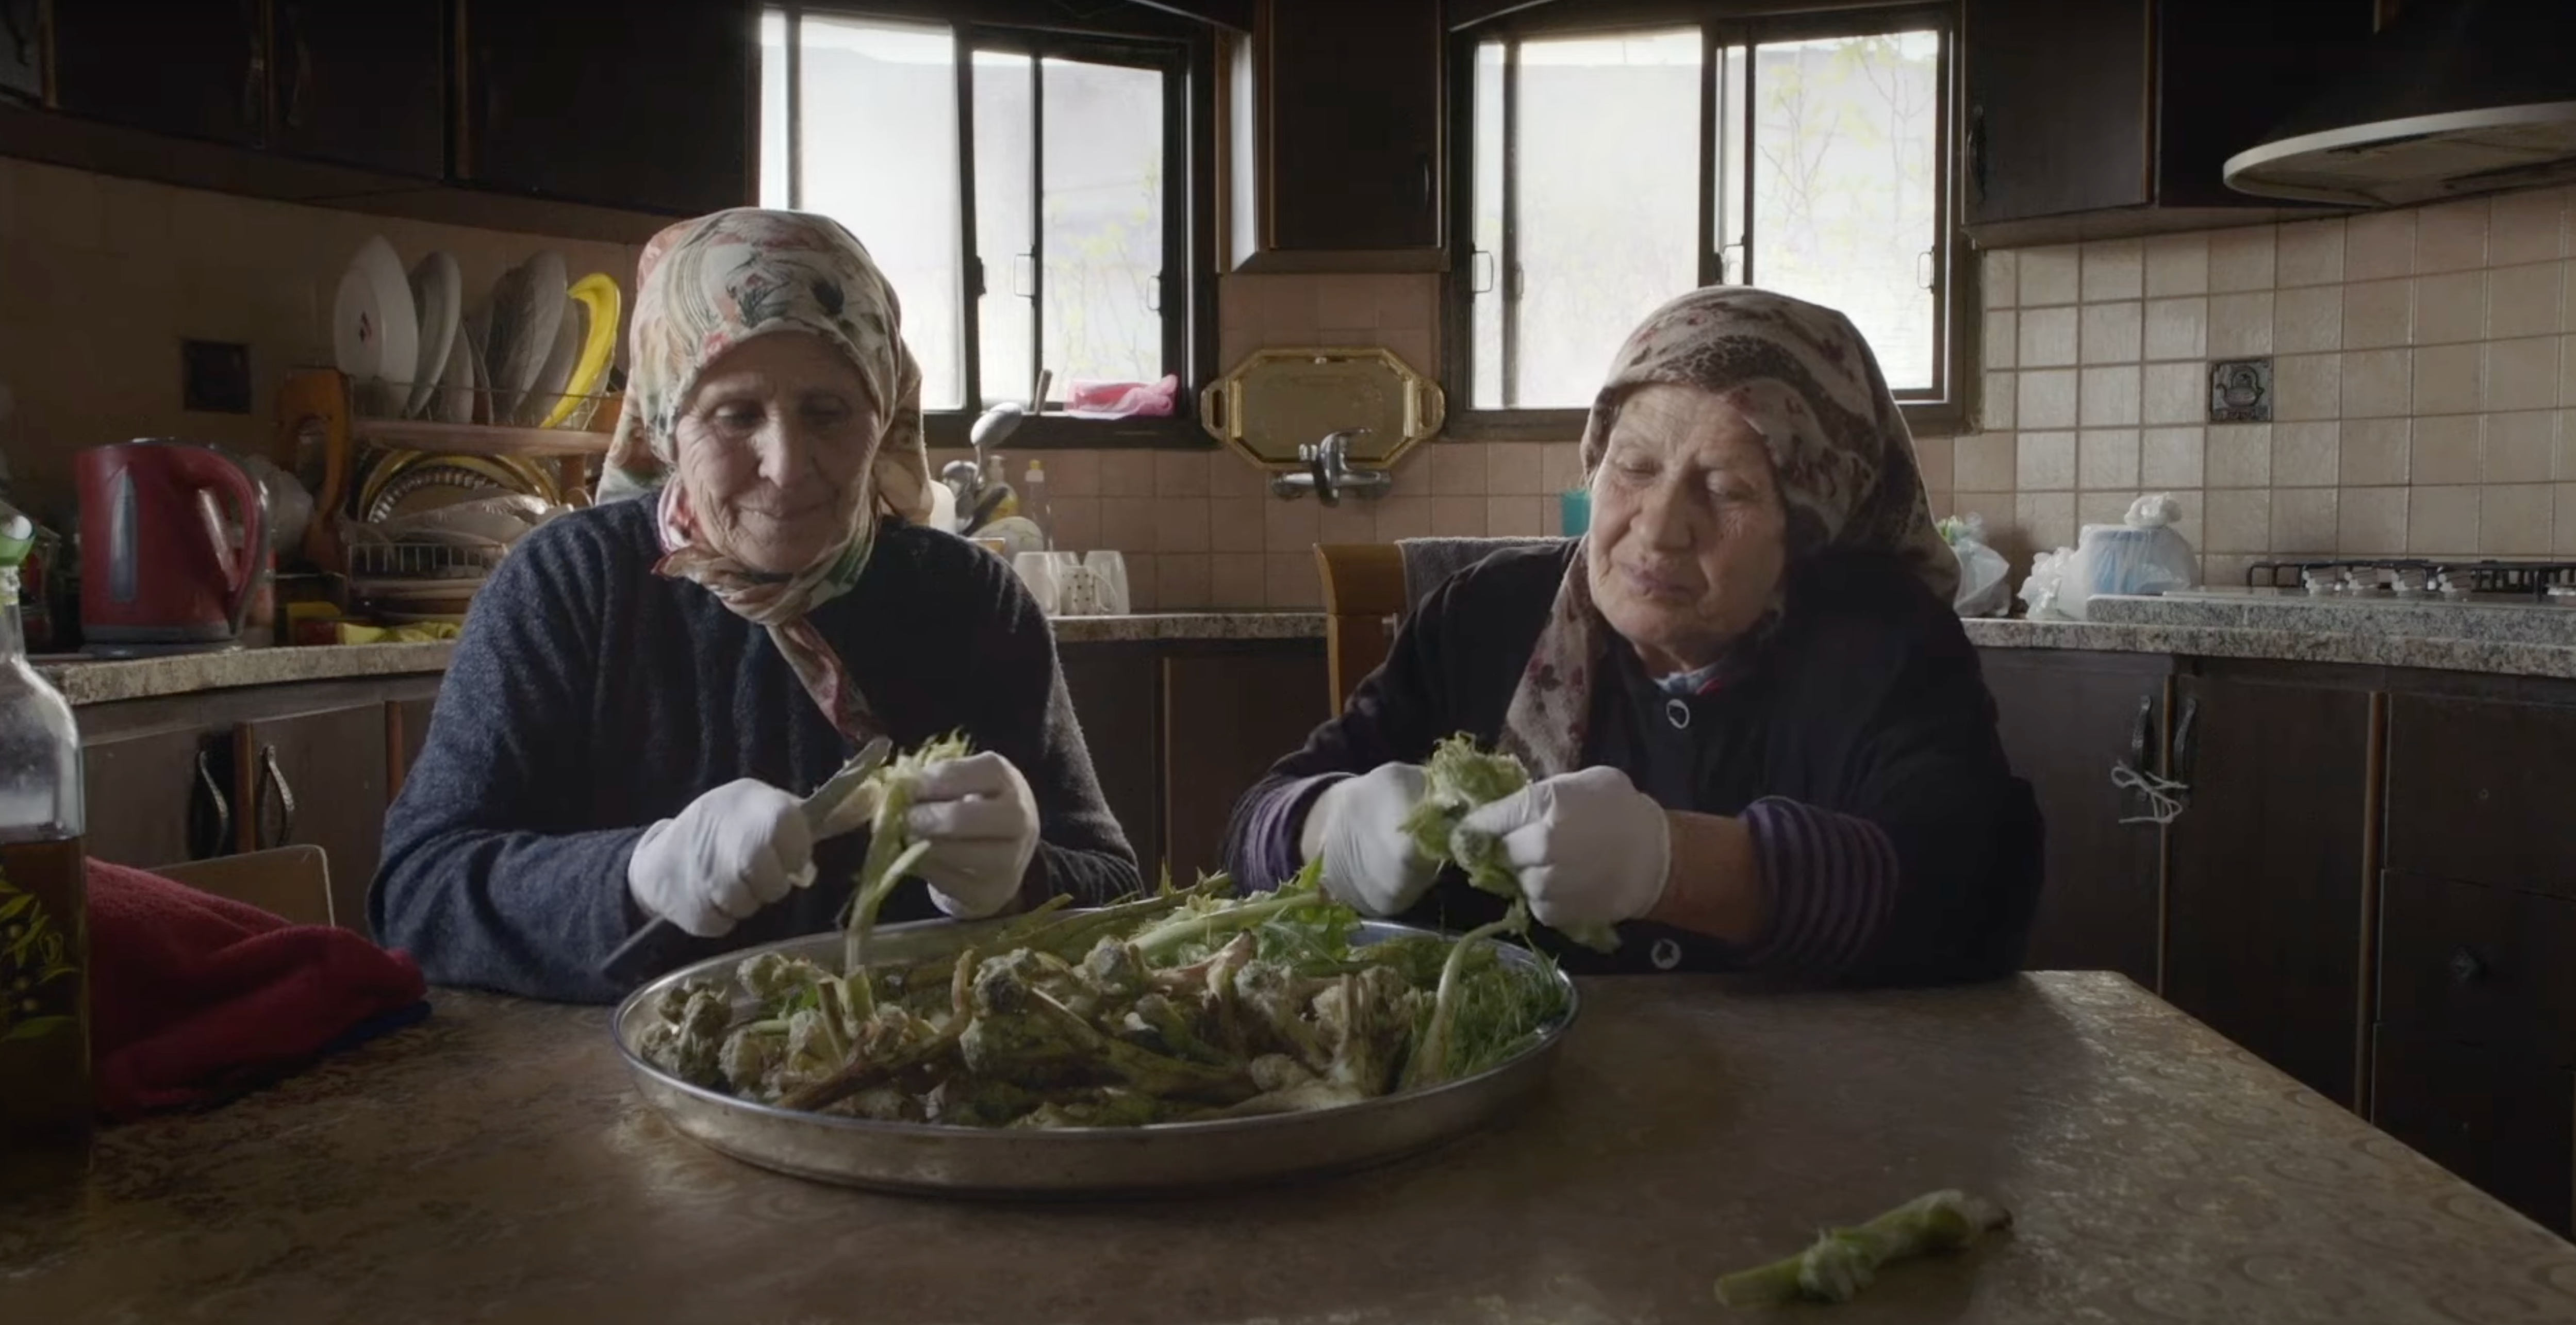 Jumana Manna’s film ‘Foragers’ explores the Palestinian practice of foraging wild plants.